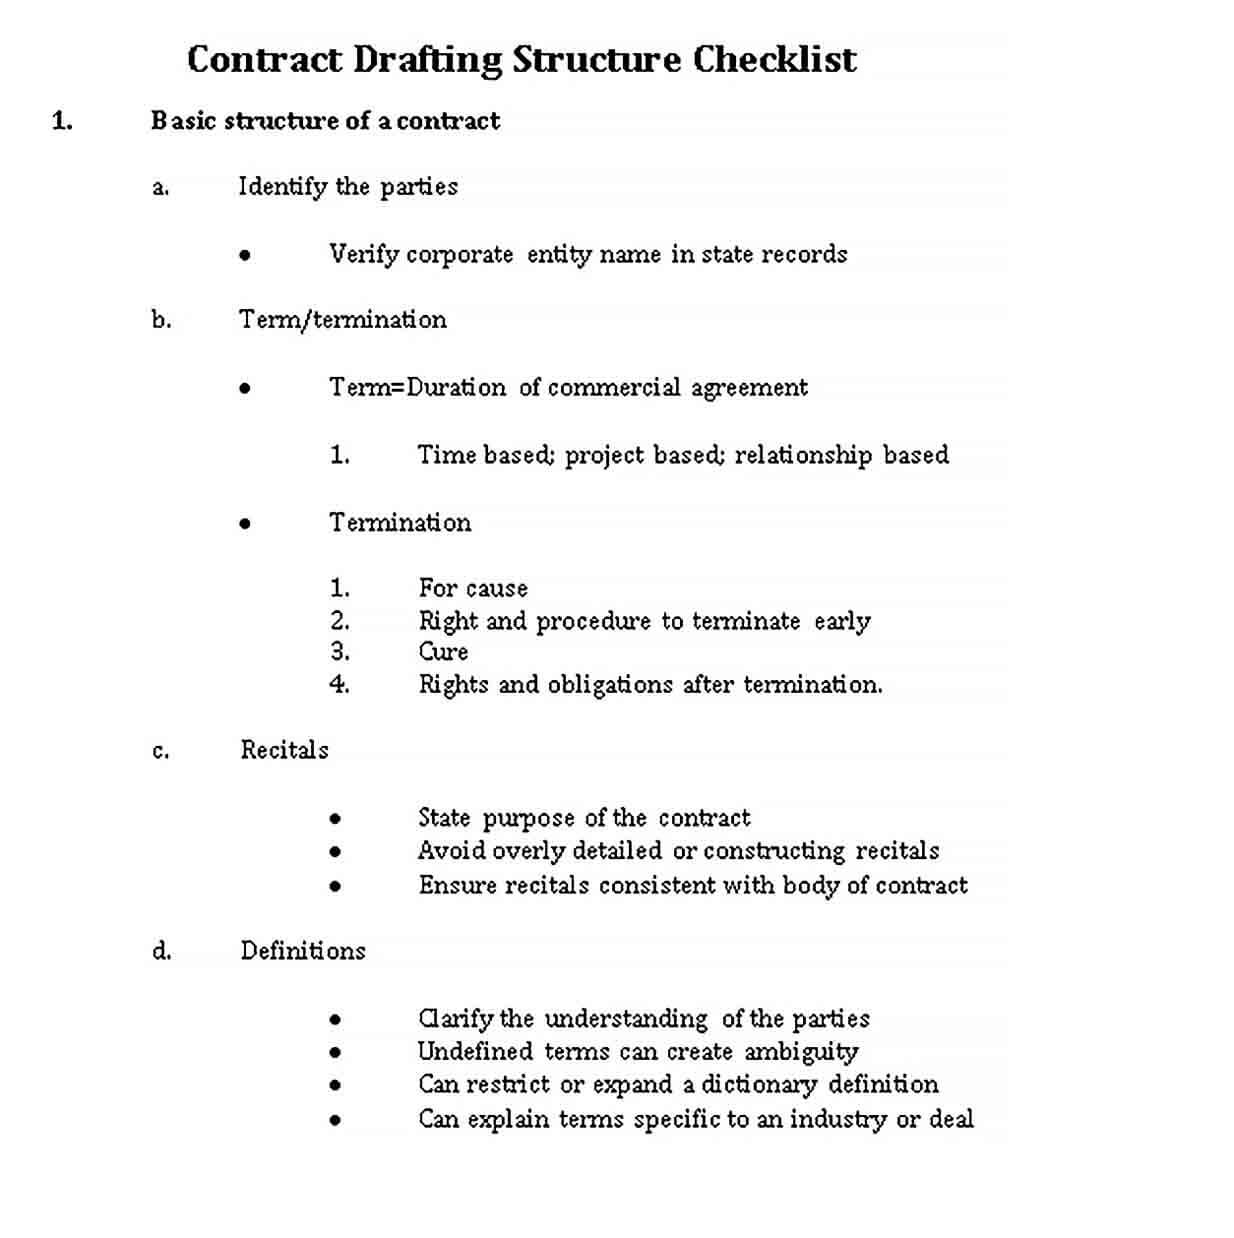 Sample Contract Drafting Checklist